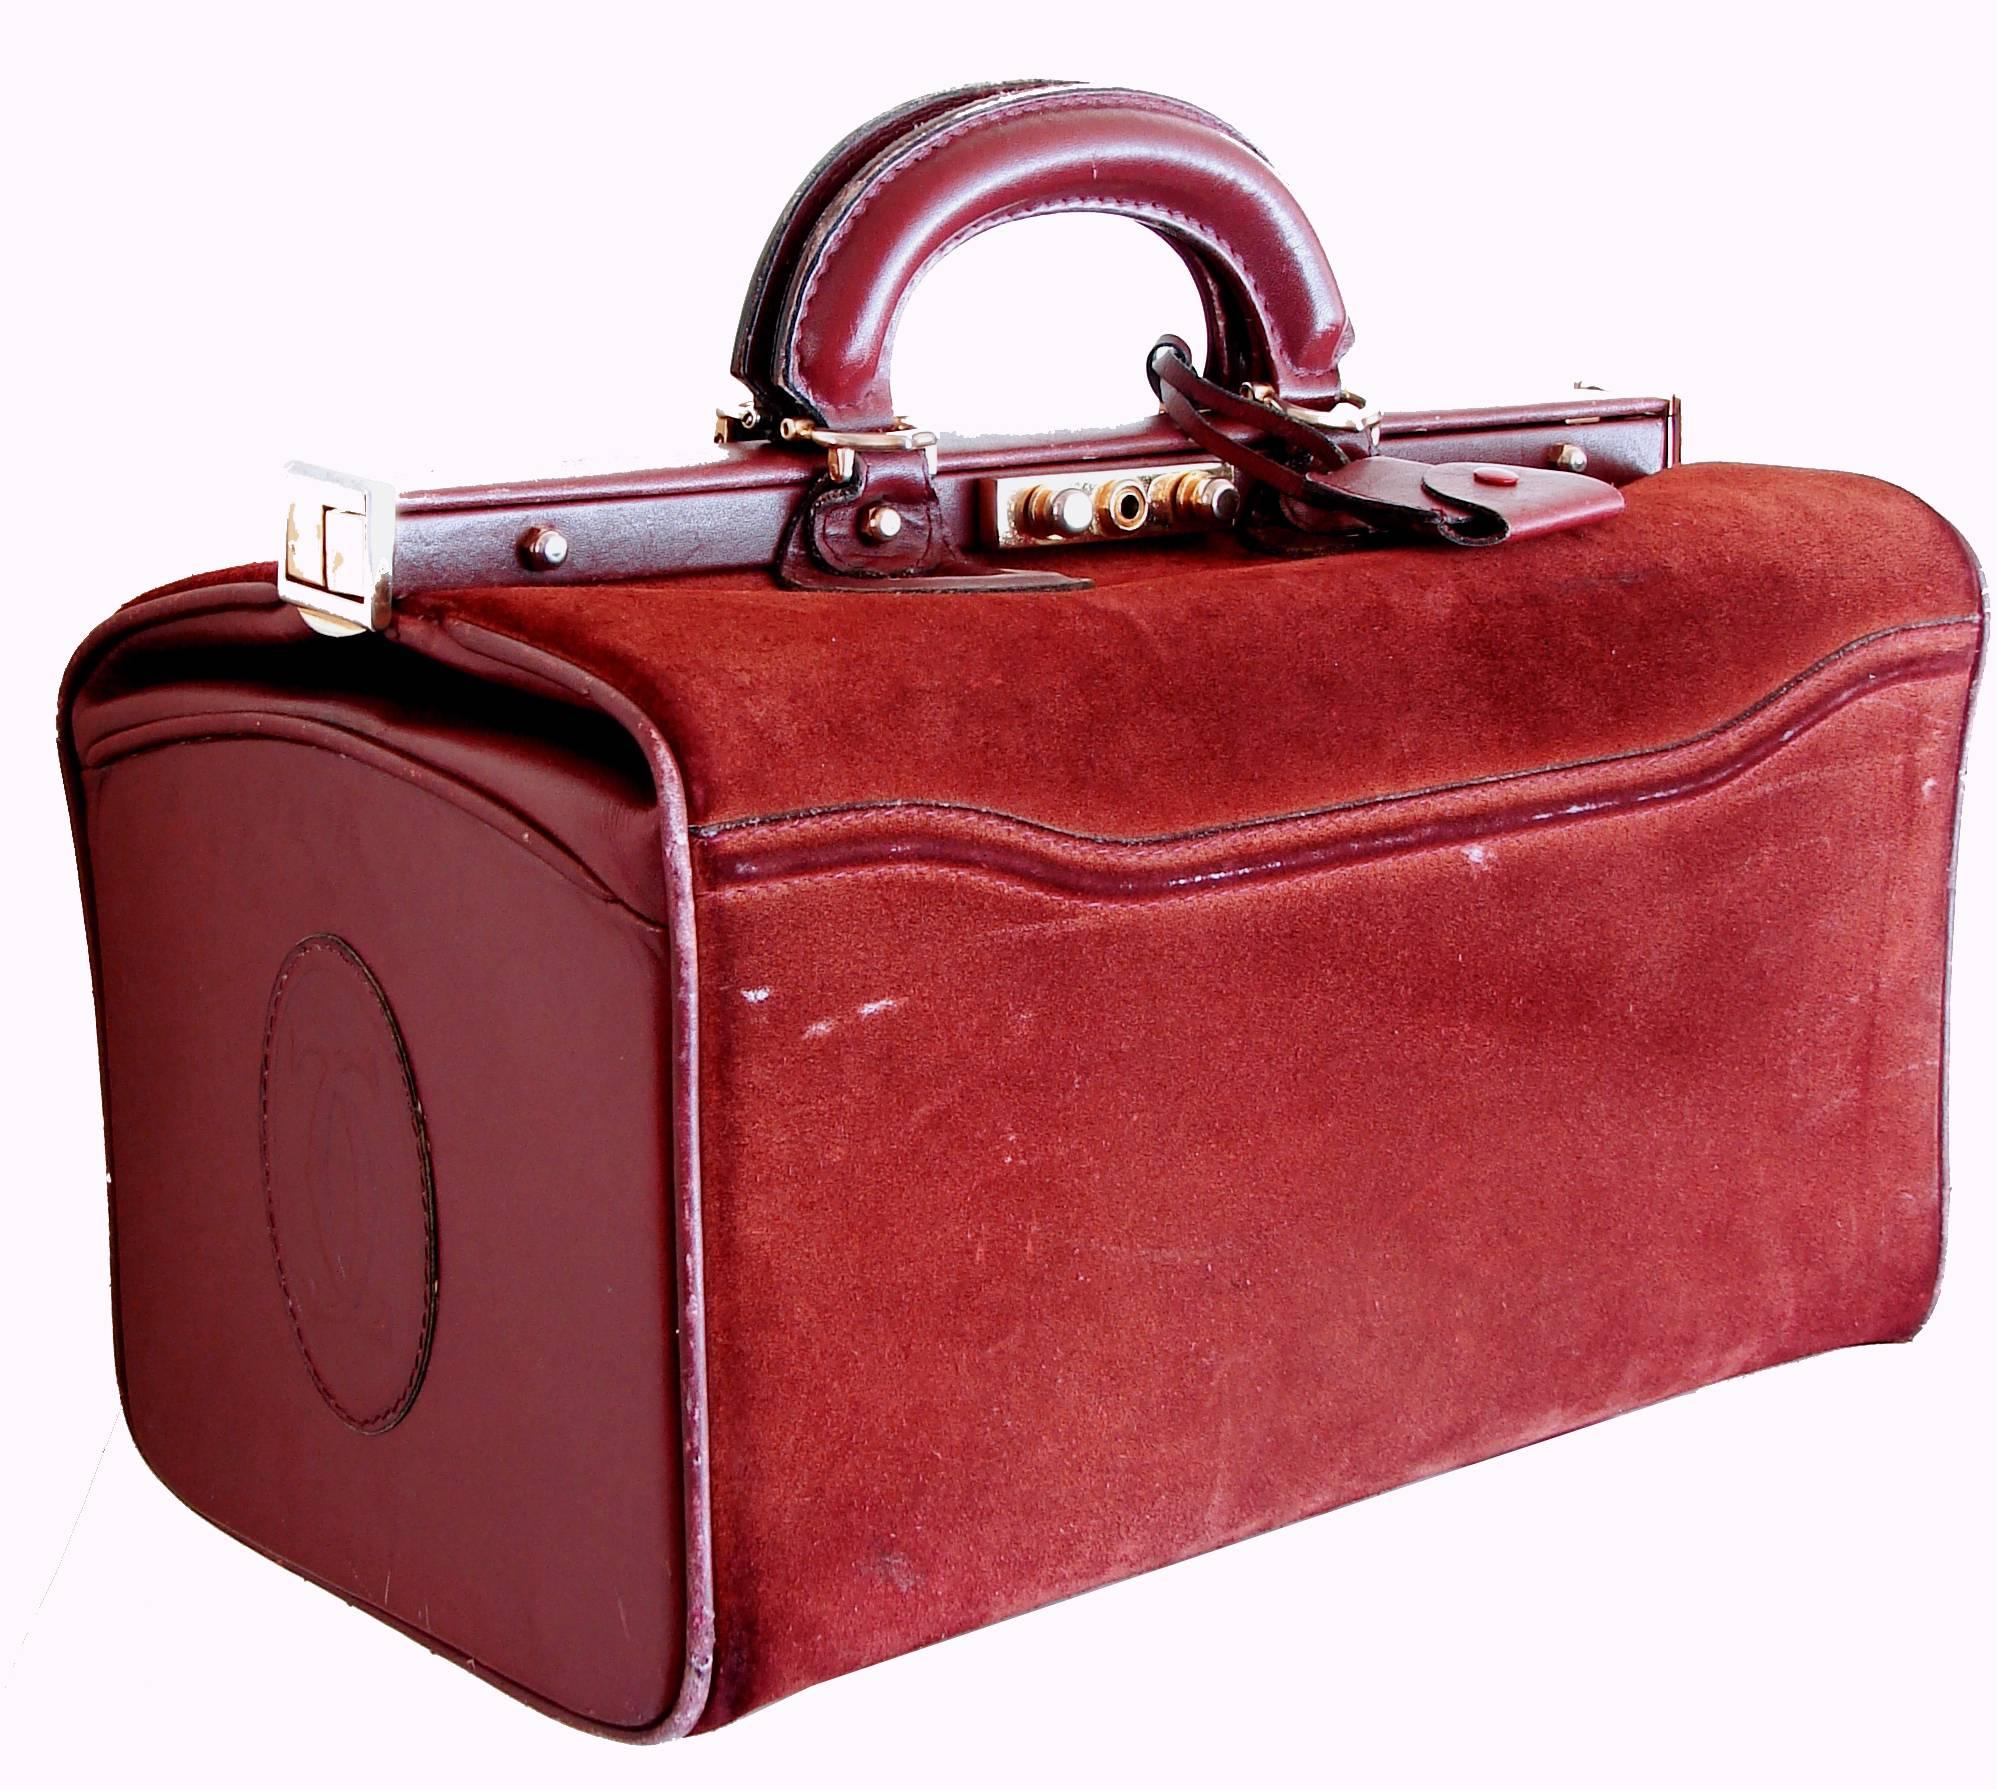 This large travel bag was made by Cartier in the late 1980s.  Made from Bordeaux suede and leather, it features the Cartier logo on each side, a top handle, a push lock fastener with key lock and a matching leather clochette with key.  Inside, its